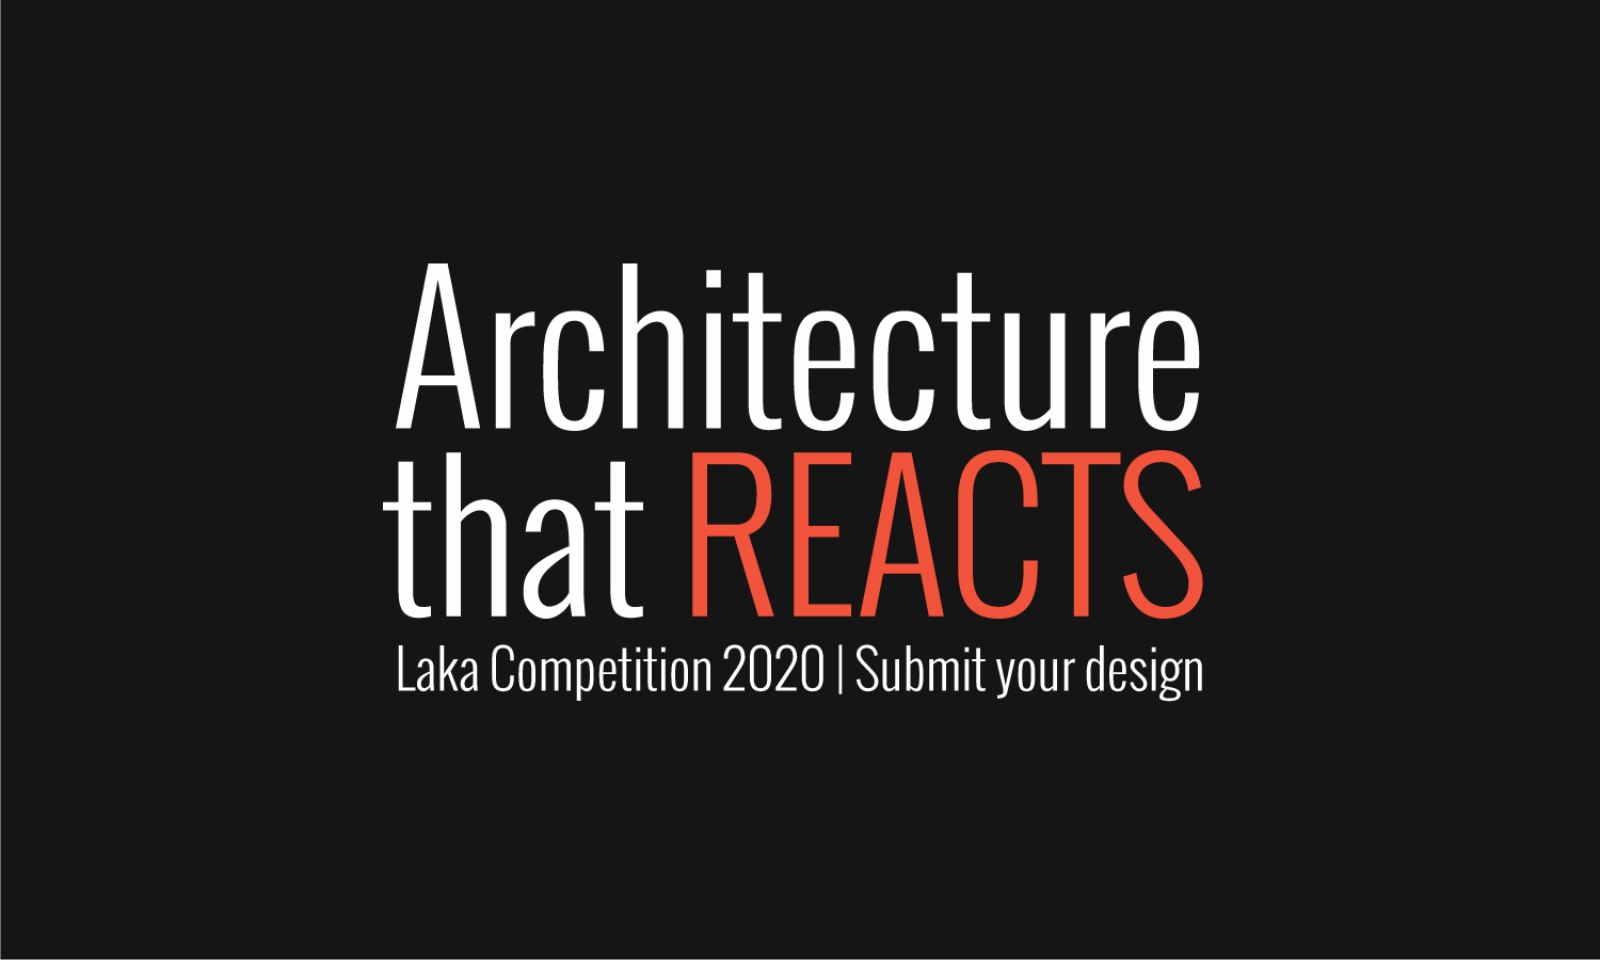 Architecture that Reacts